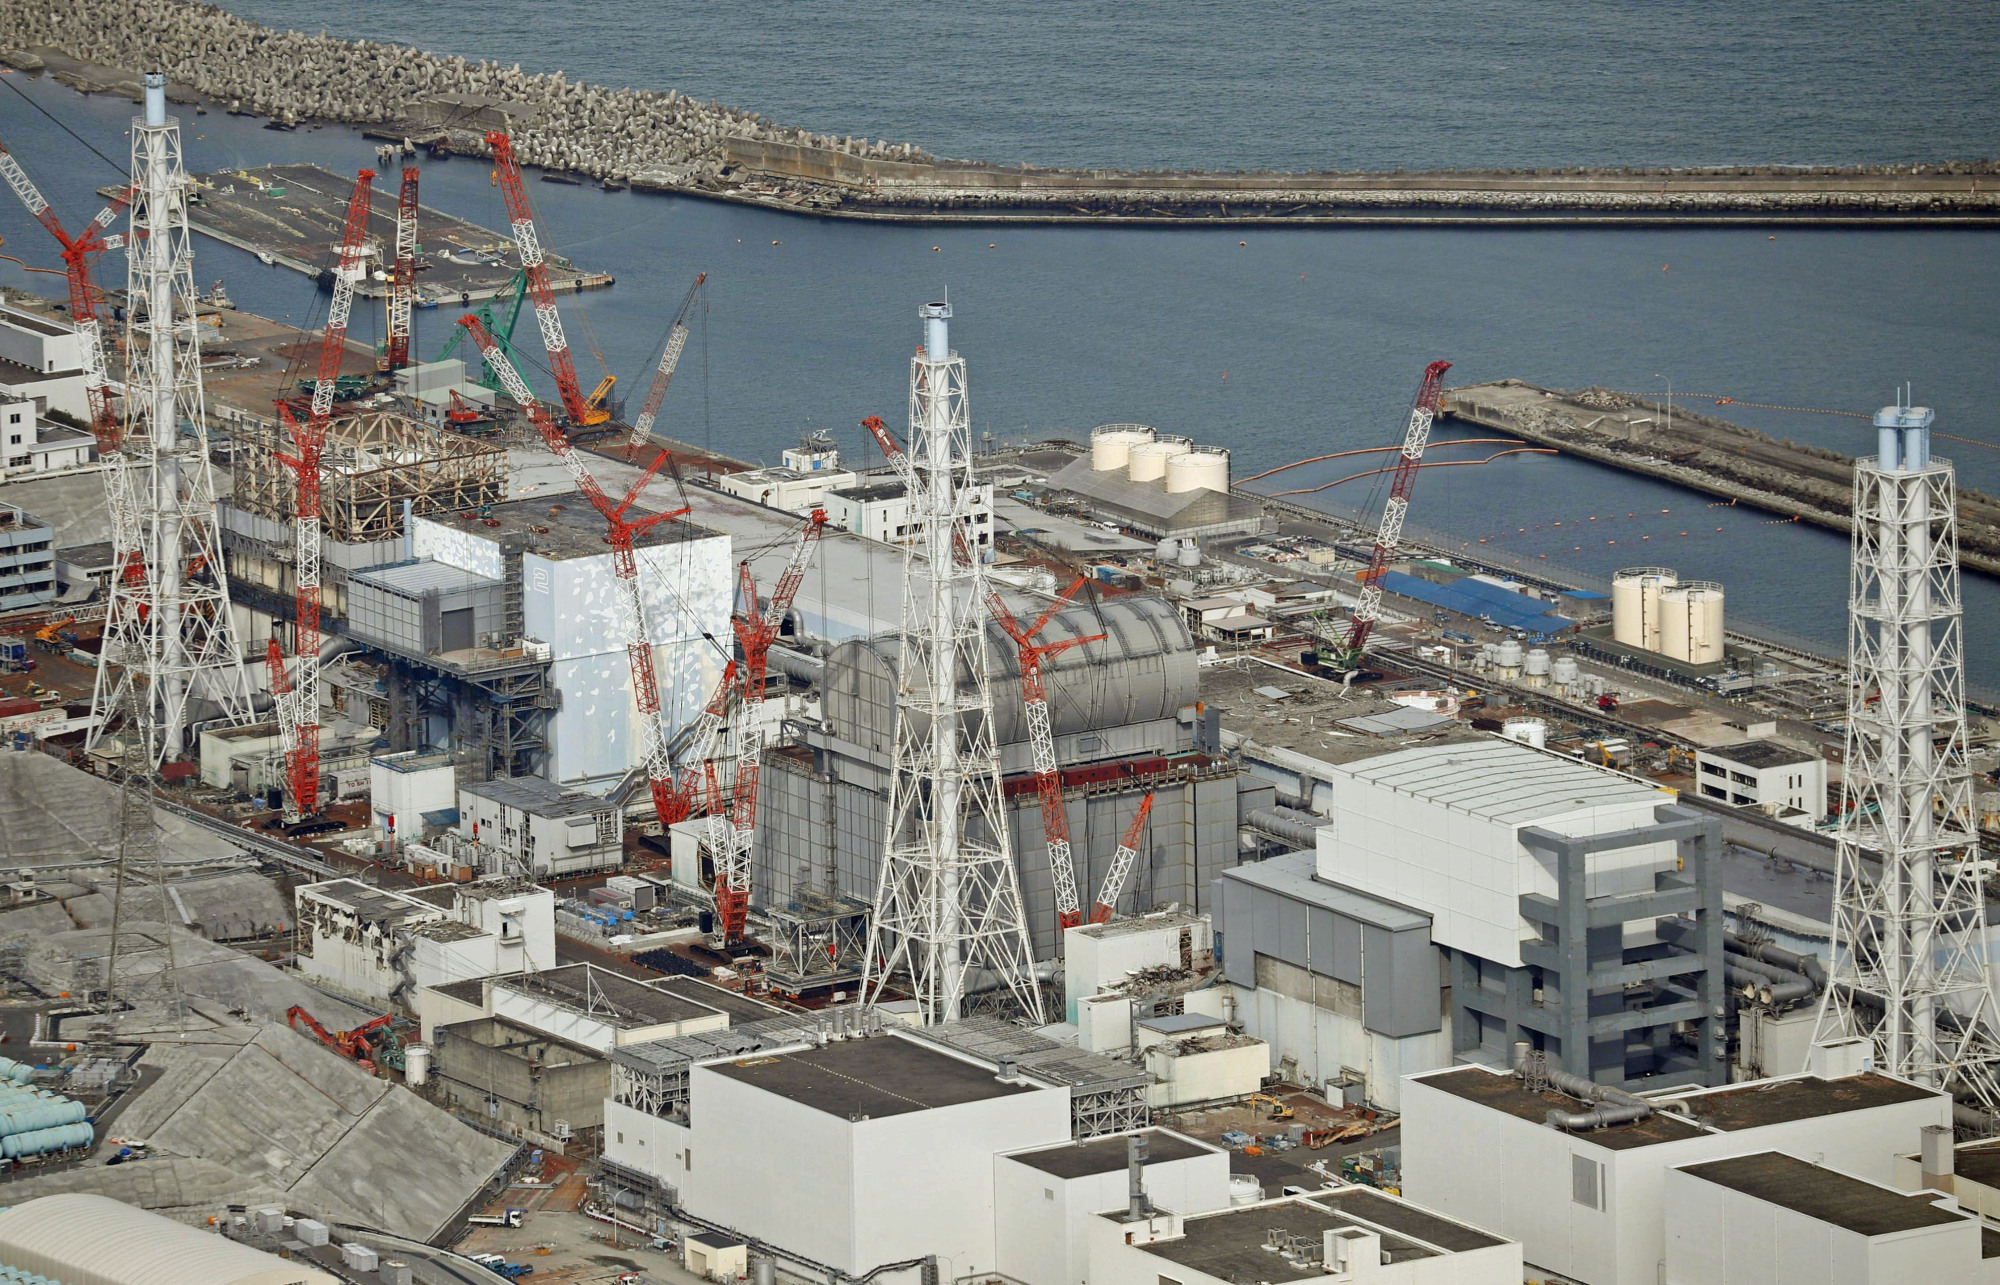 The defunct Fukushima No. 1 nuclear power plant, which was hit by a triple core meltdown in March 2011, is shown in February. | KYODO